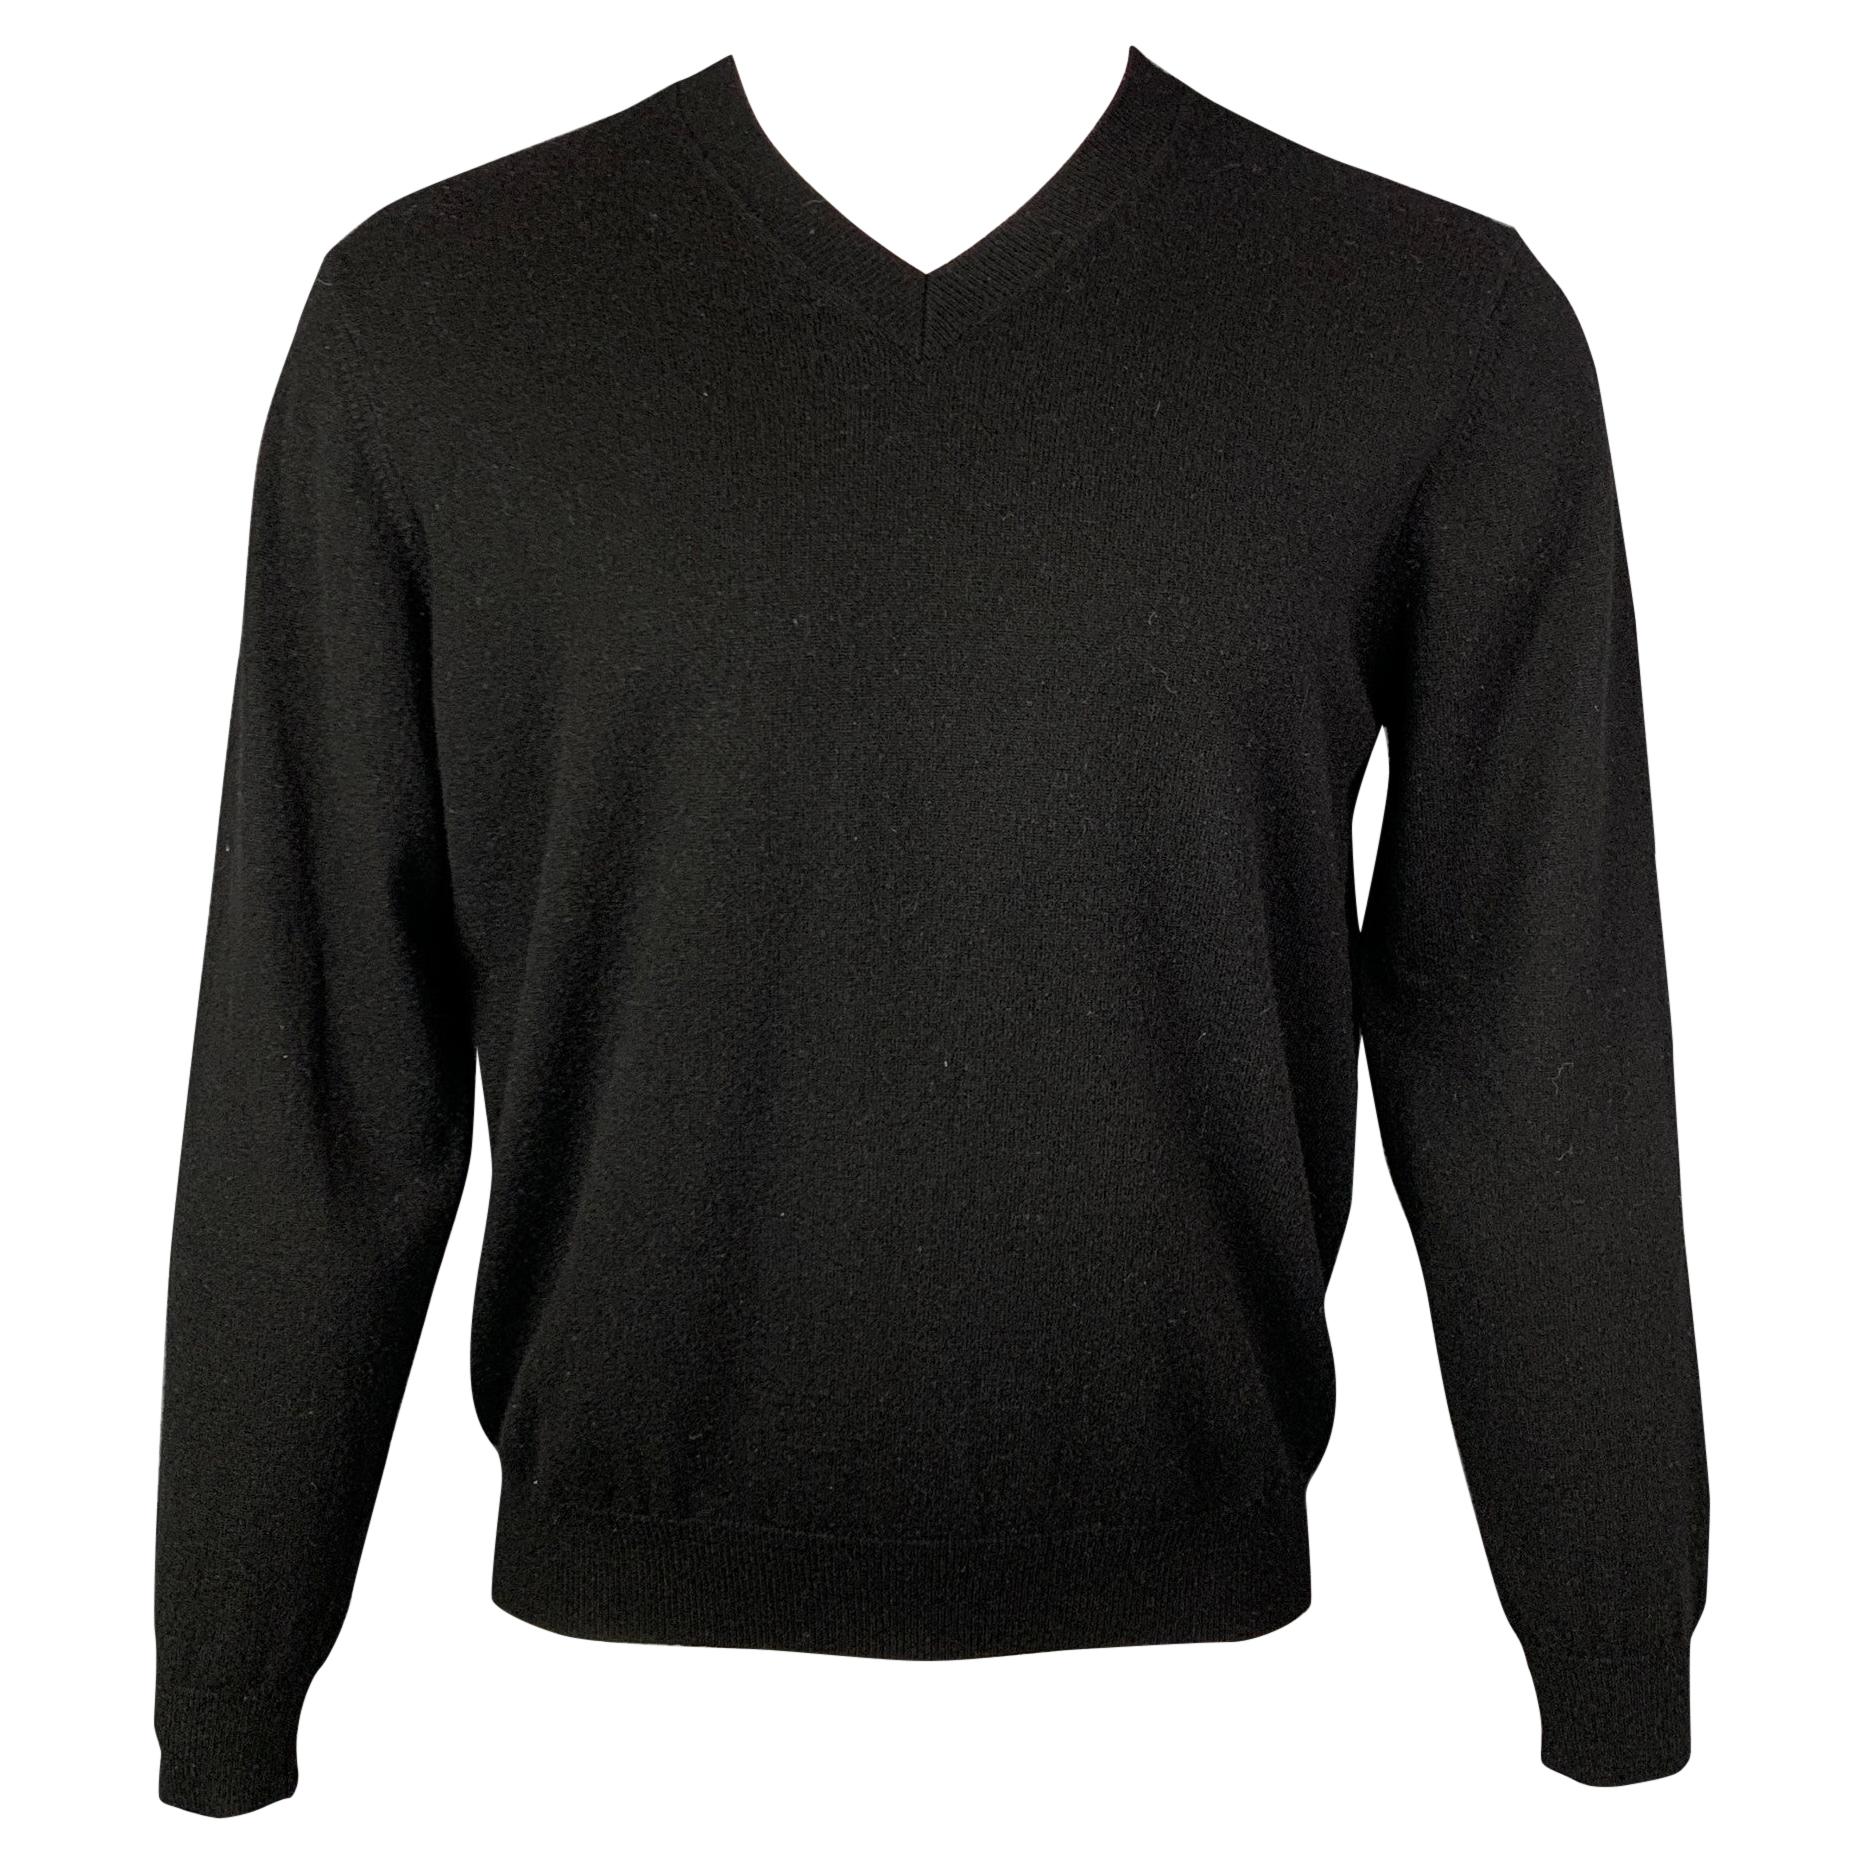 NEIMAN MARCUS Size M Black Knitted Cashmere V-Neck Pullover